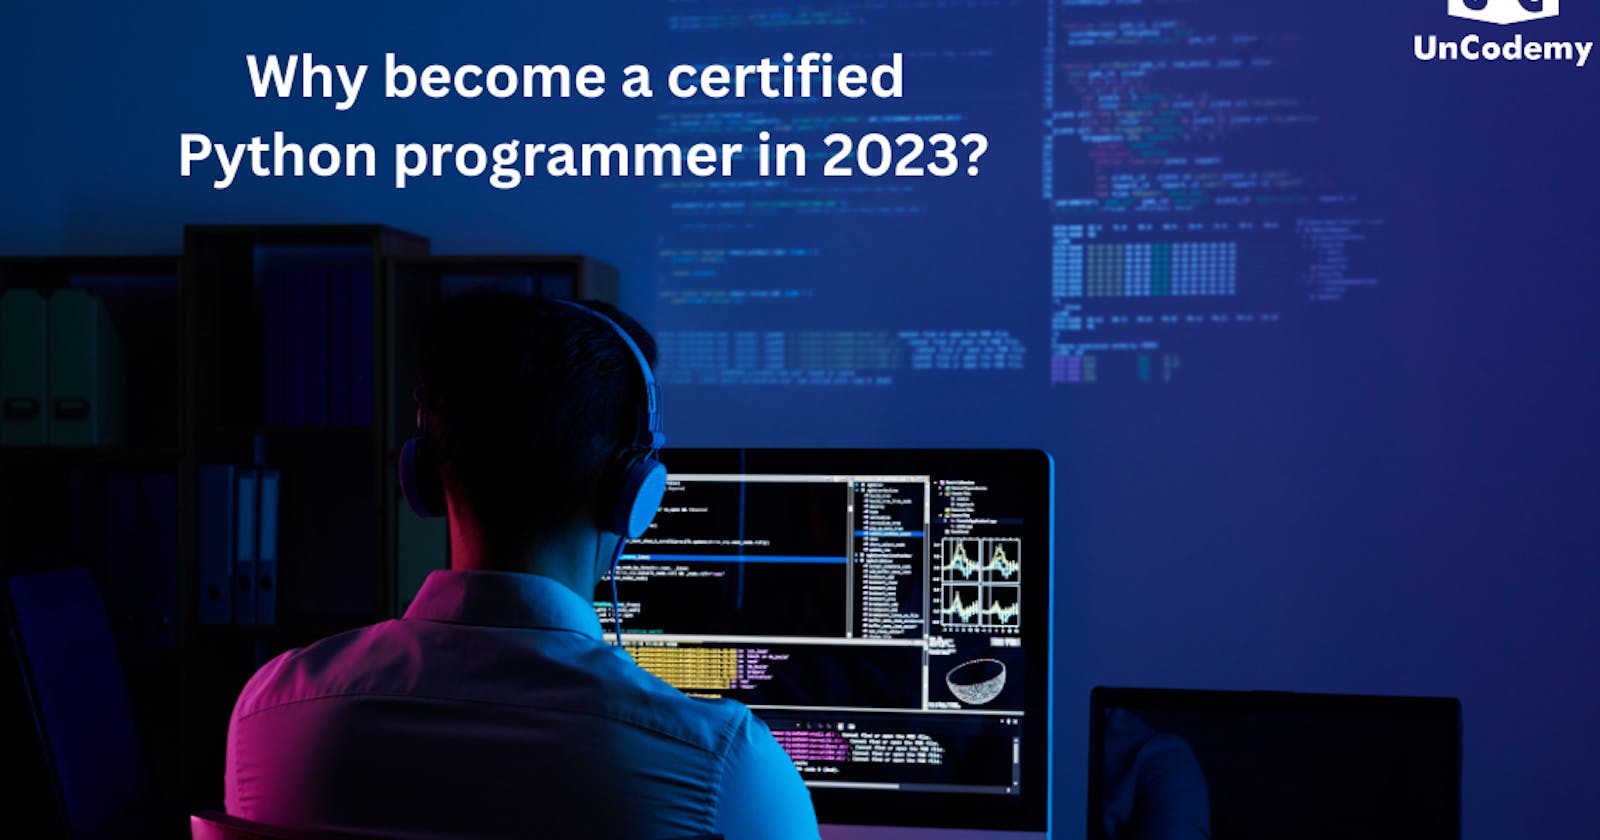 Why become a certified Python programmer in 2023?